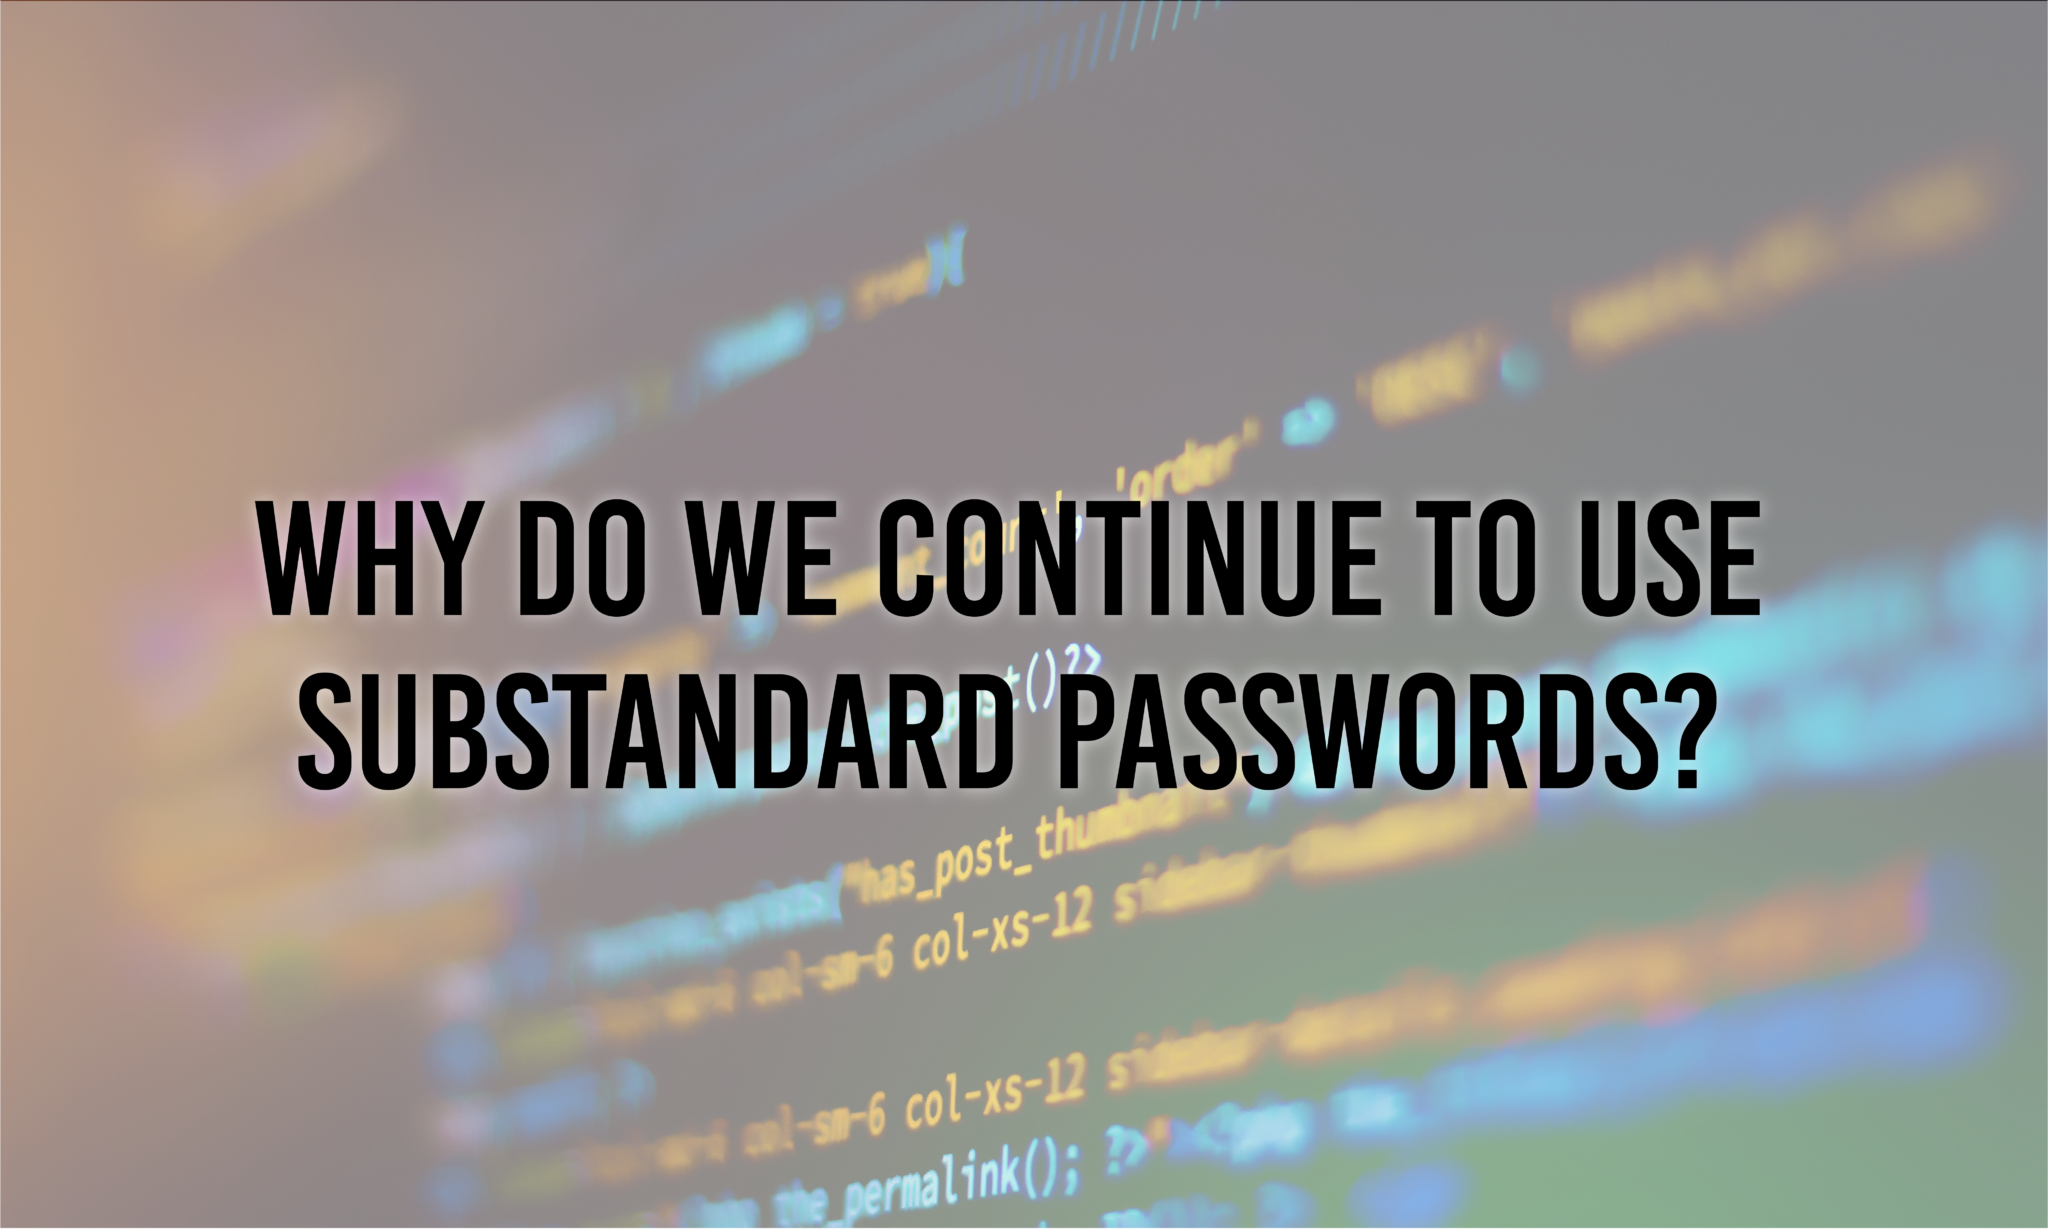 Why Do We Continue to Use Substandard Passwords?